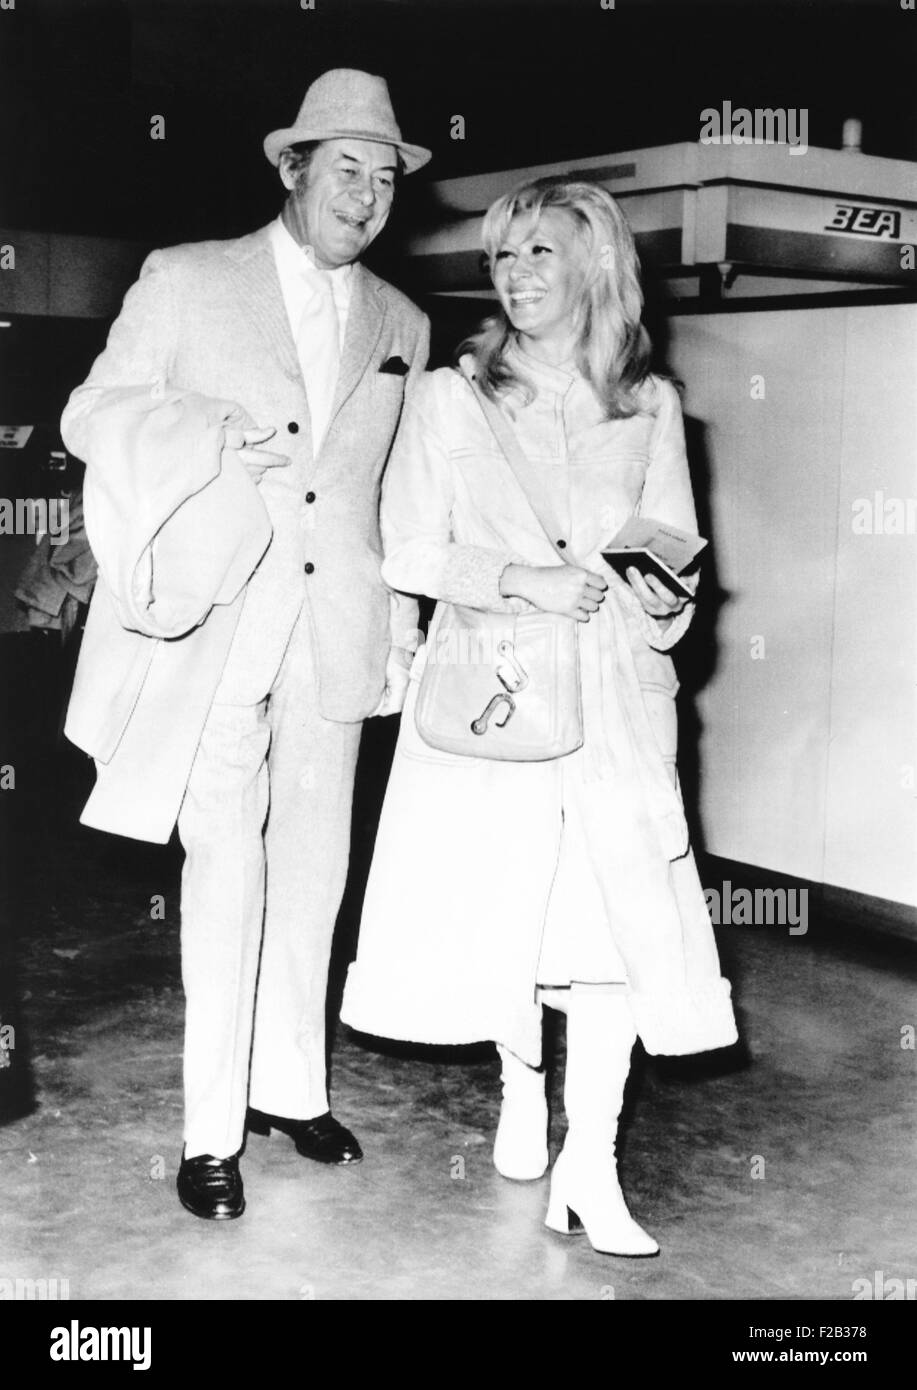 Actor Rex Harrison and Elizabeth Harris, former wife of actor Richard Harris, at Heathrow Airport. The engaged couple were taking a short holiday to Lo Bourgot, France. Nov. 26, 1970. Their marriage lasted from 1971-75. (CSU 2015 7 282) Stock Photo